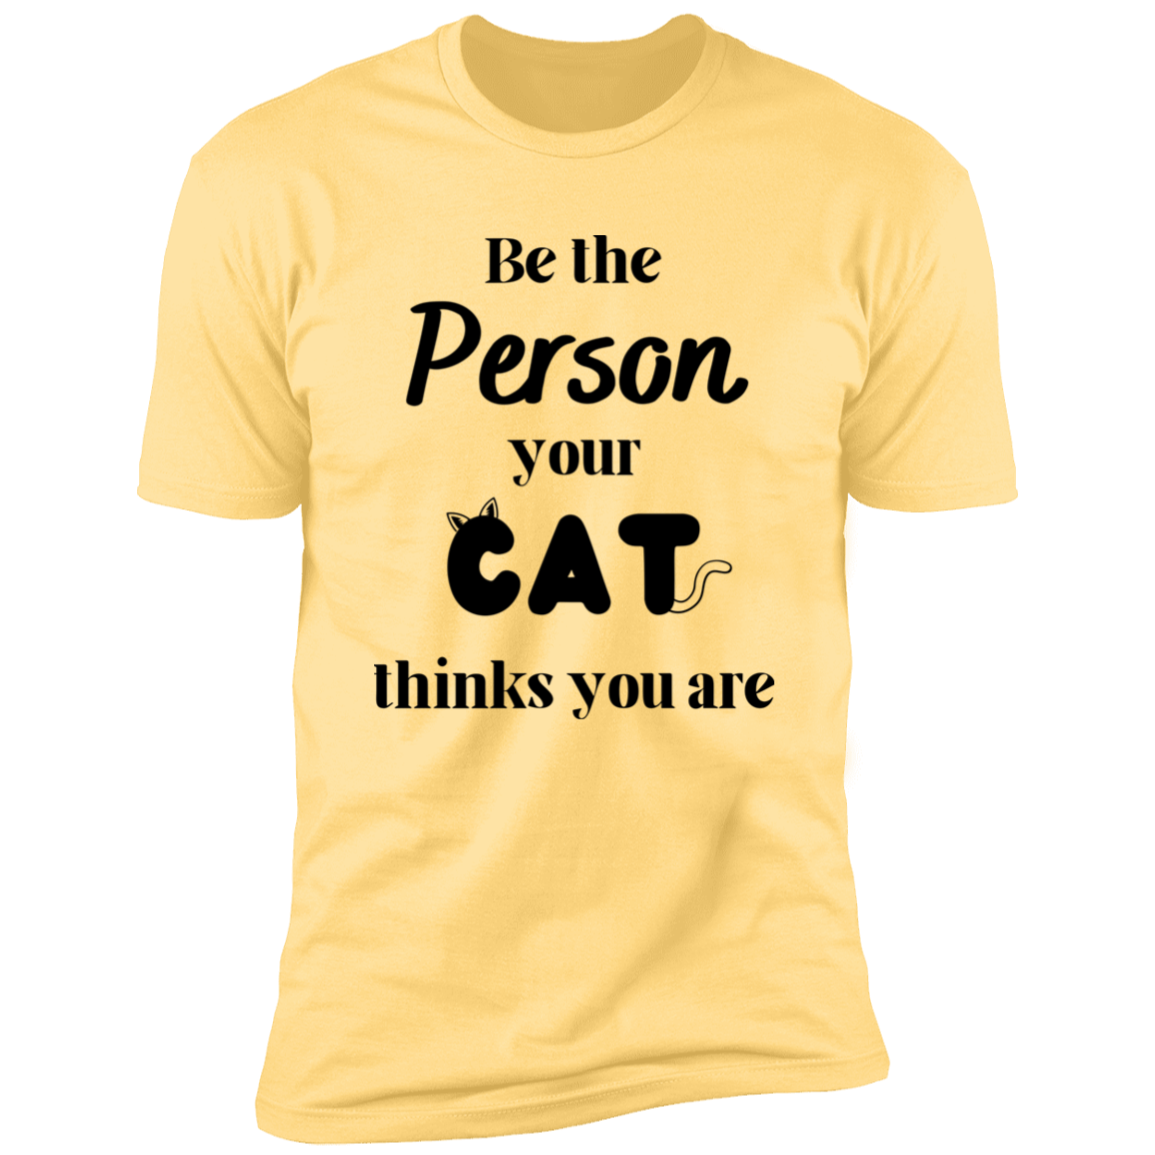 Be the Person Your Cat Thinks You Are T-shirt, Cat Shirt for humans, in banana Cream